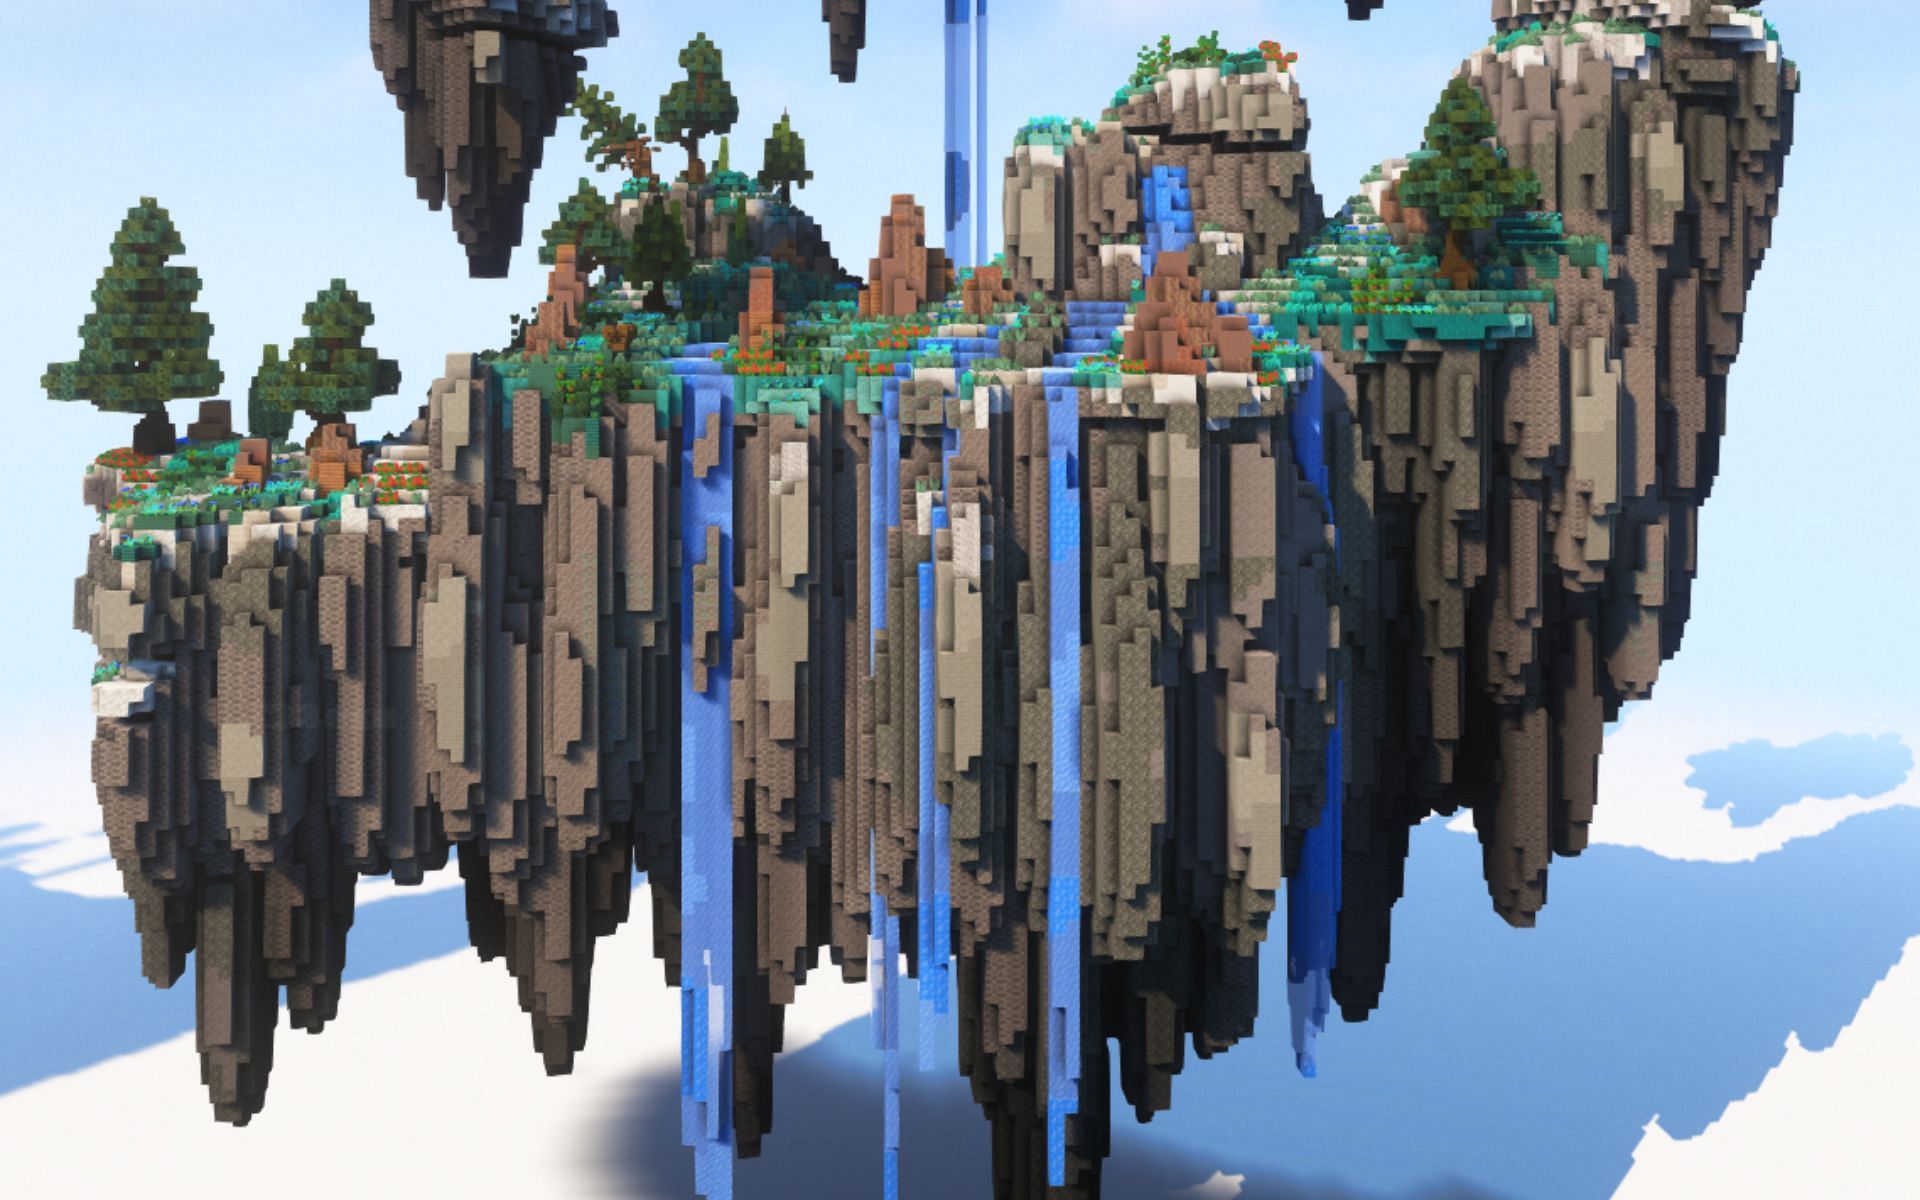 The design of Chiseled Tuff inspired me to make a sky island utilizing the  new Tuff blocks : r/Minecraft